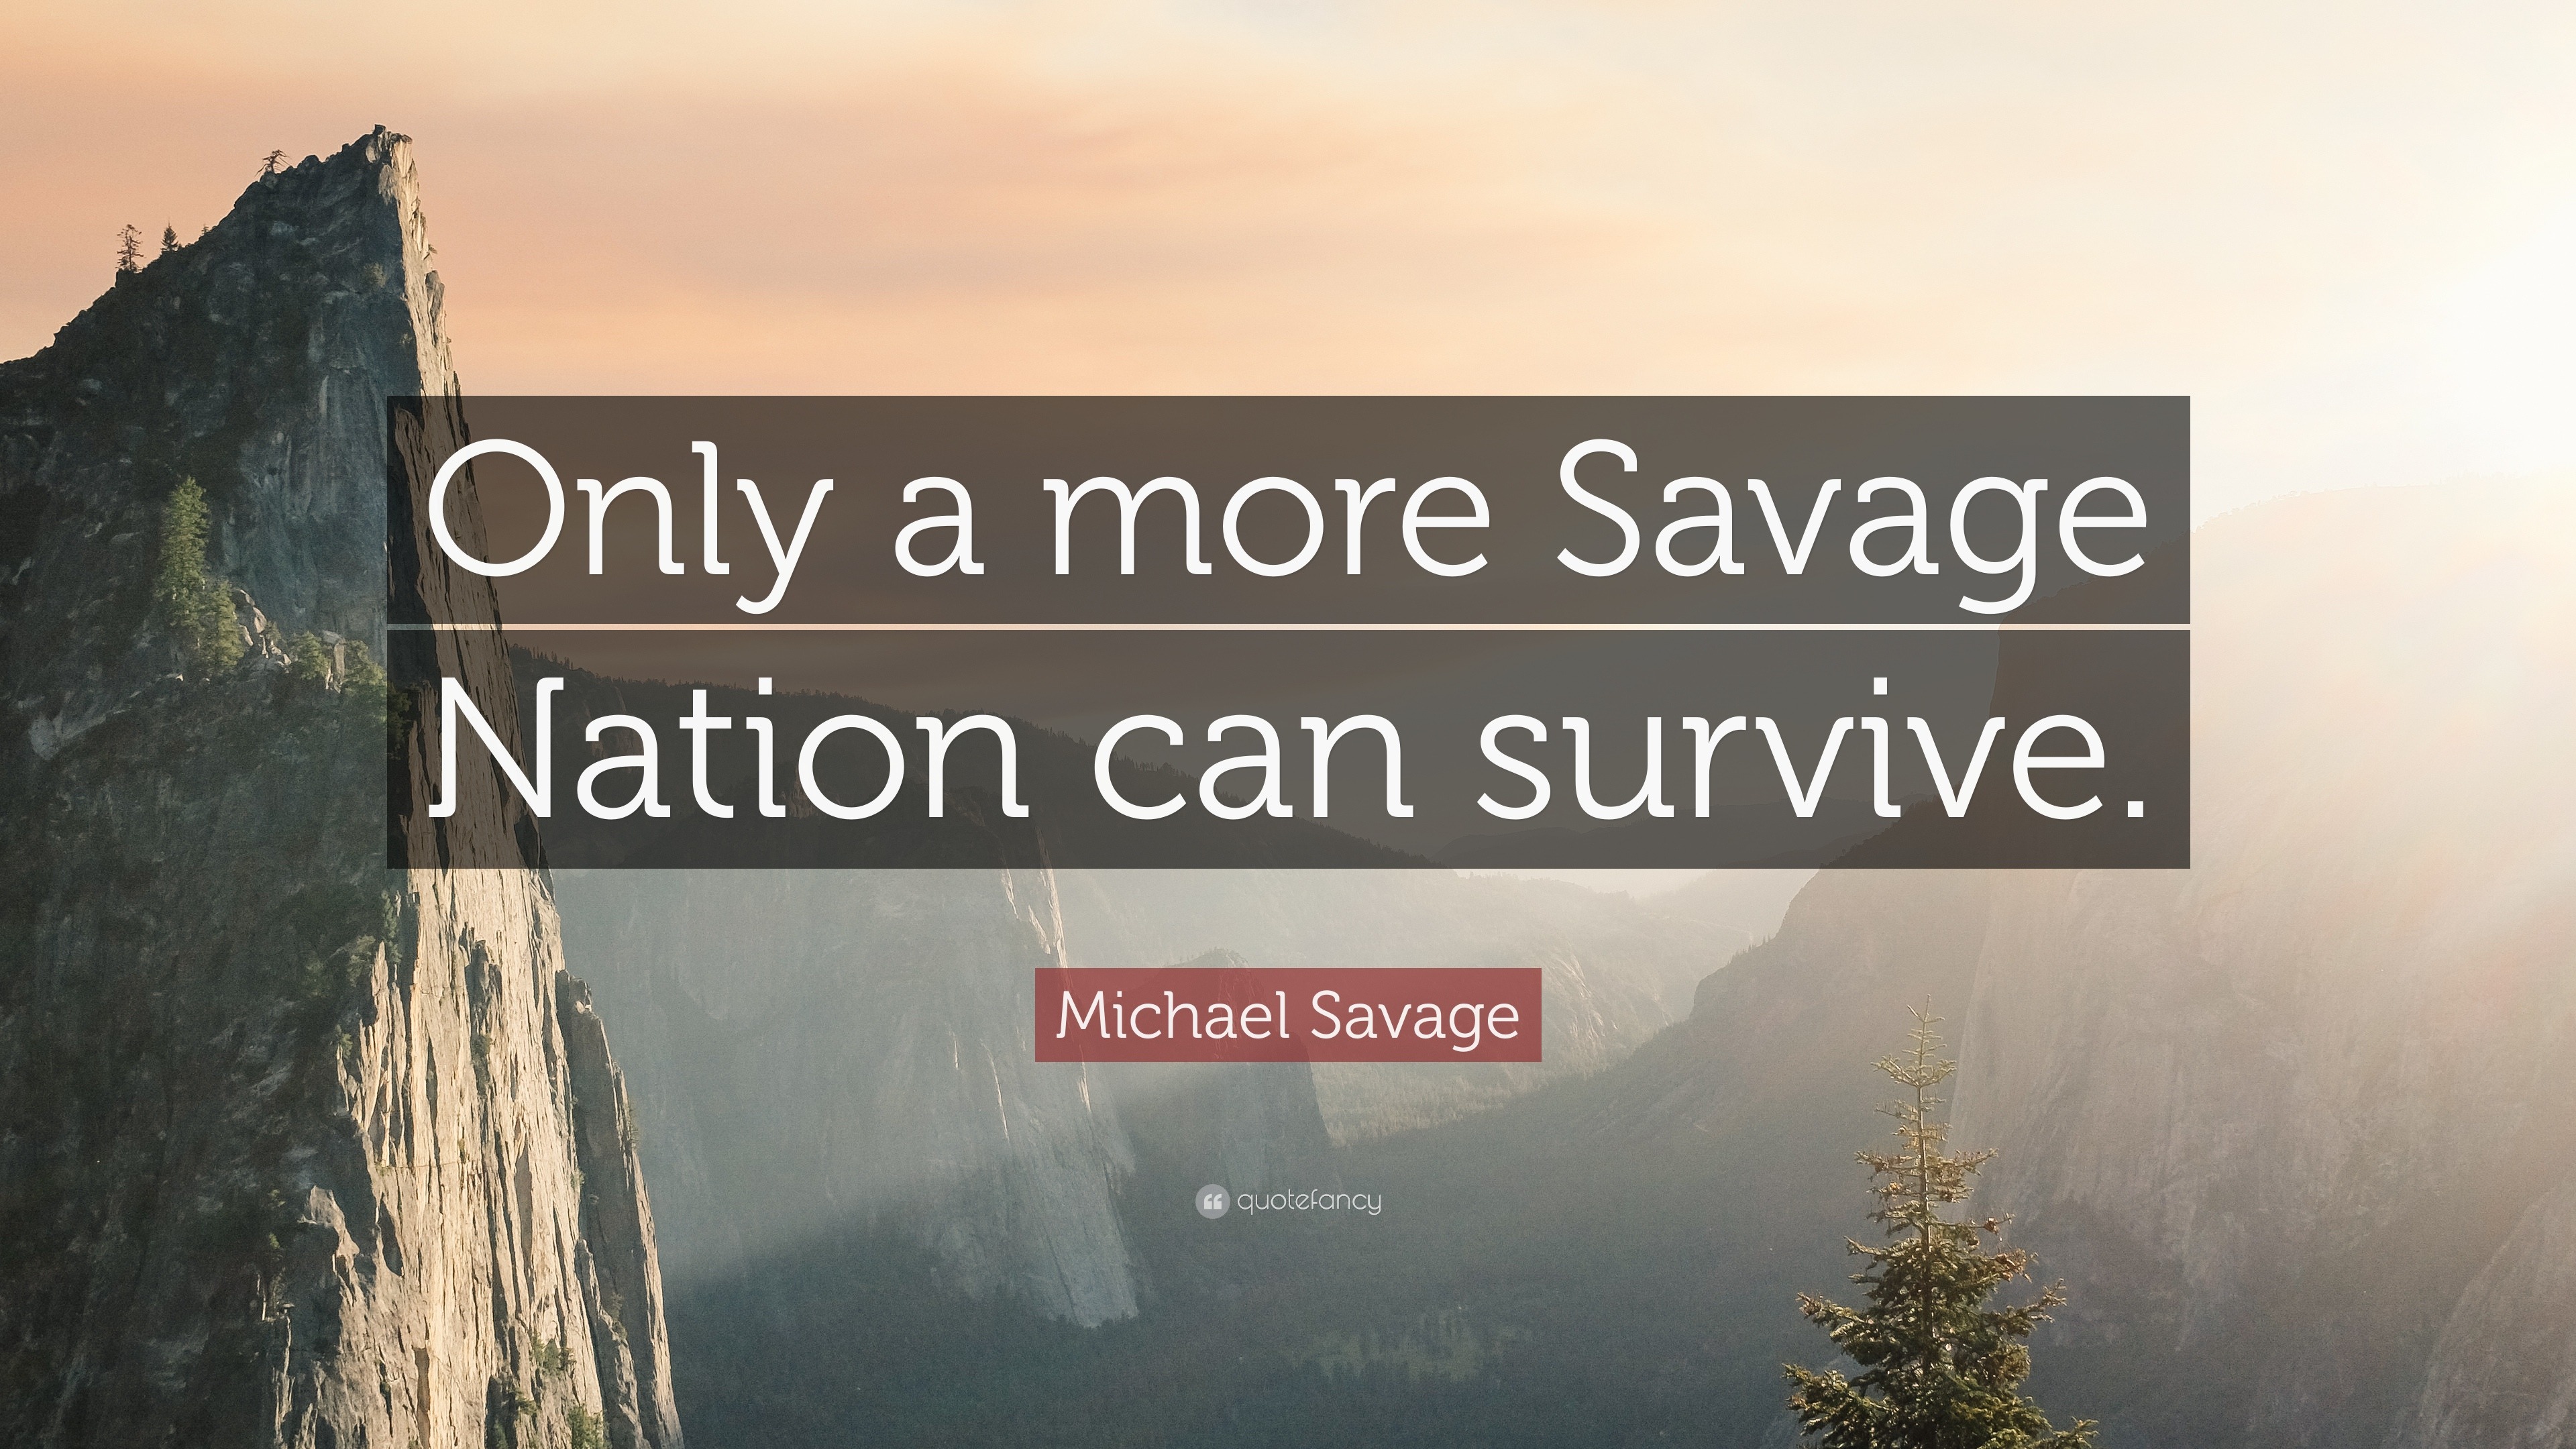 Michael Savage Quotes (16 wallpapers) - Quotefancy